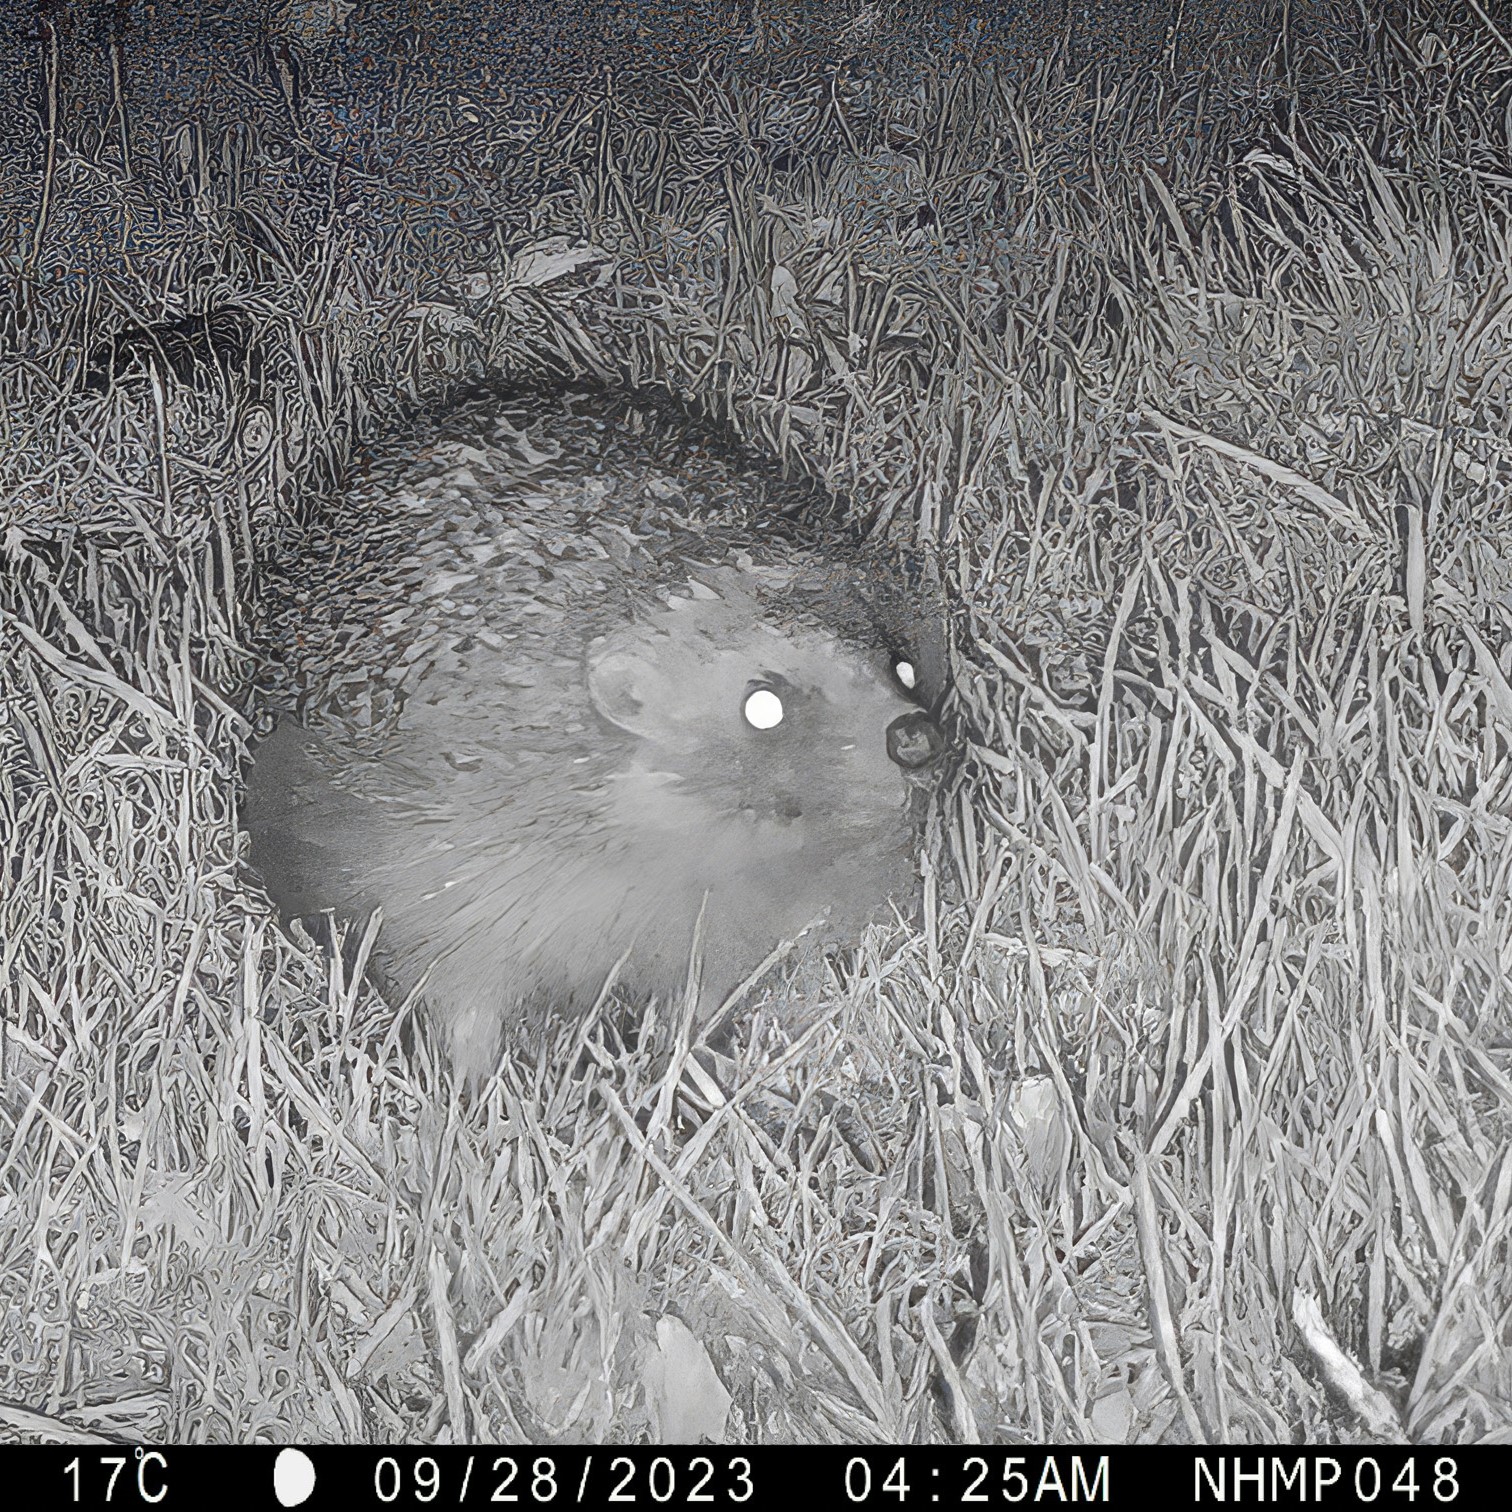 A hedgehog spotted as part of the National Hedgehog Monitoring Programme. C. the National Hedgehog Monitoring Programme